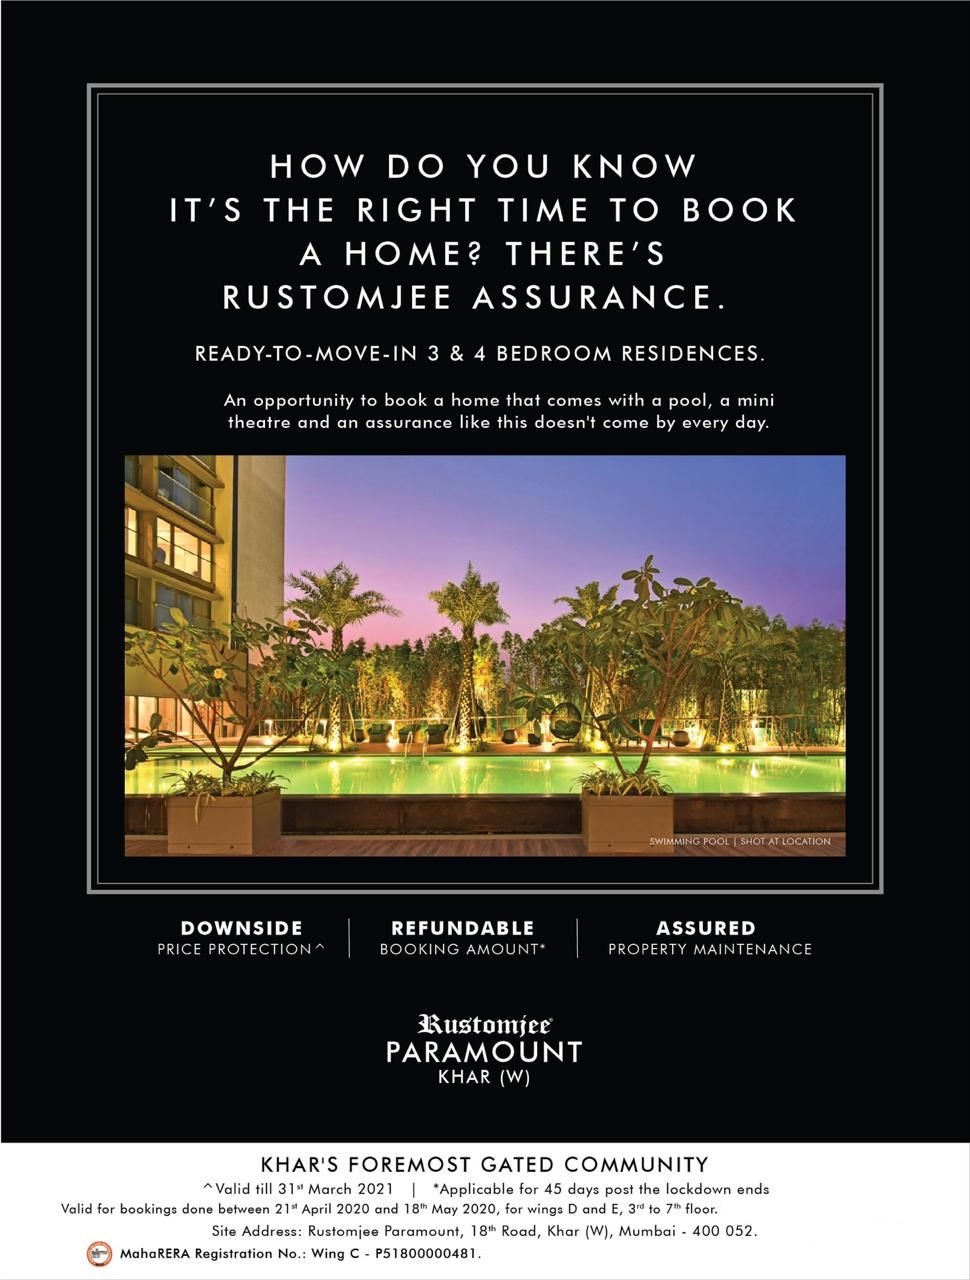 Ready to move in 3 and 4 bedroom residences at Rustomjee Paramount in Mumbai